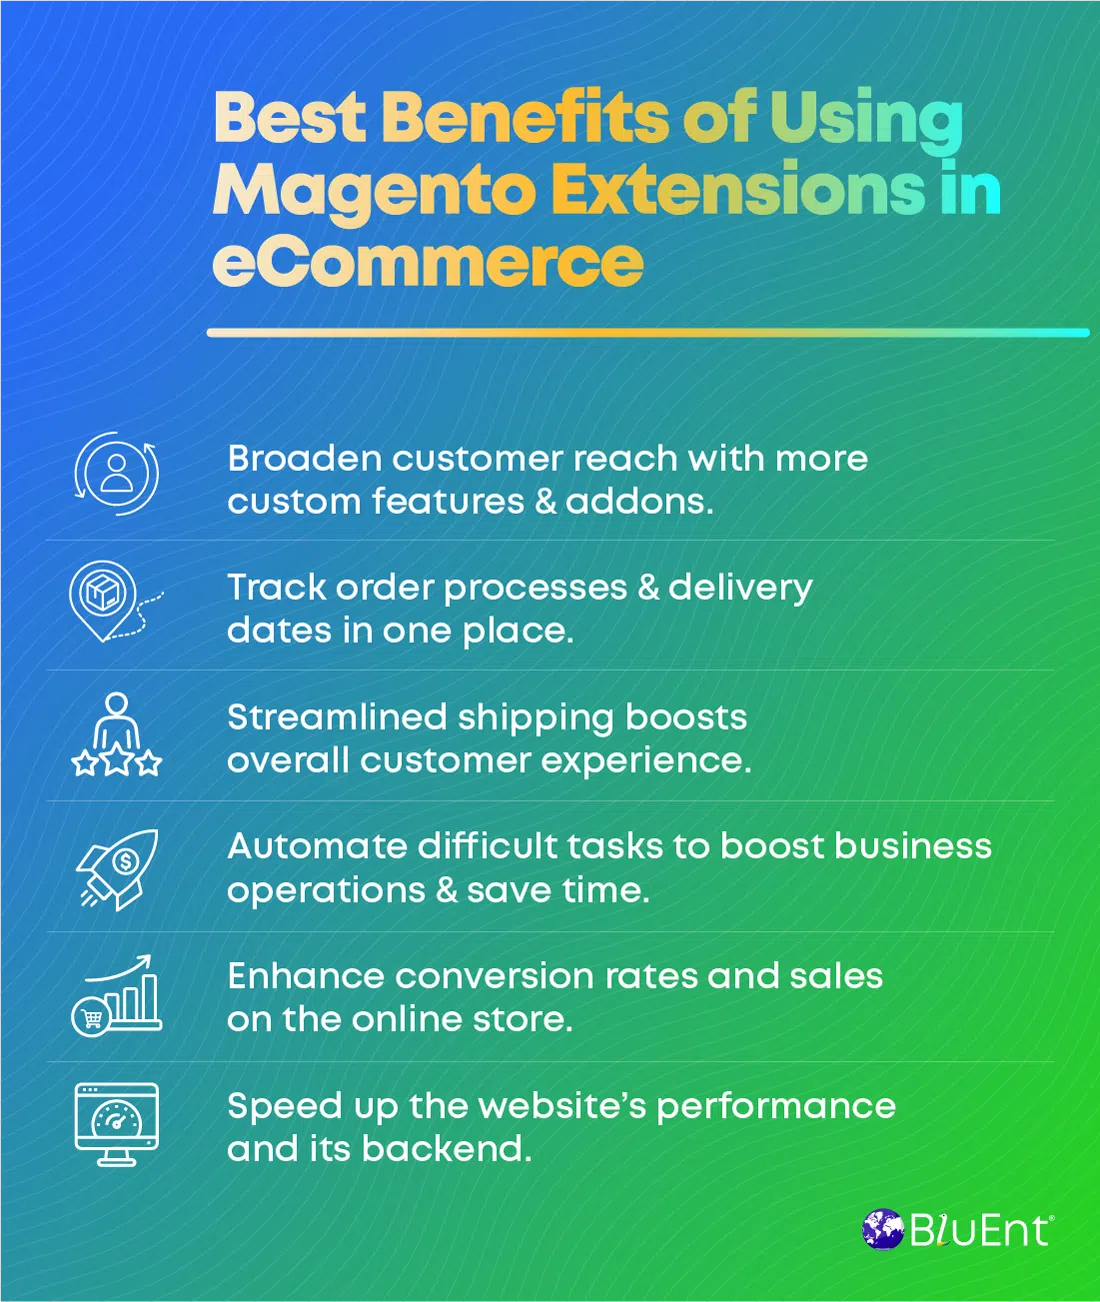 List of best Magento extensions benefits for eCommerce